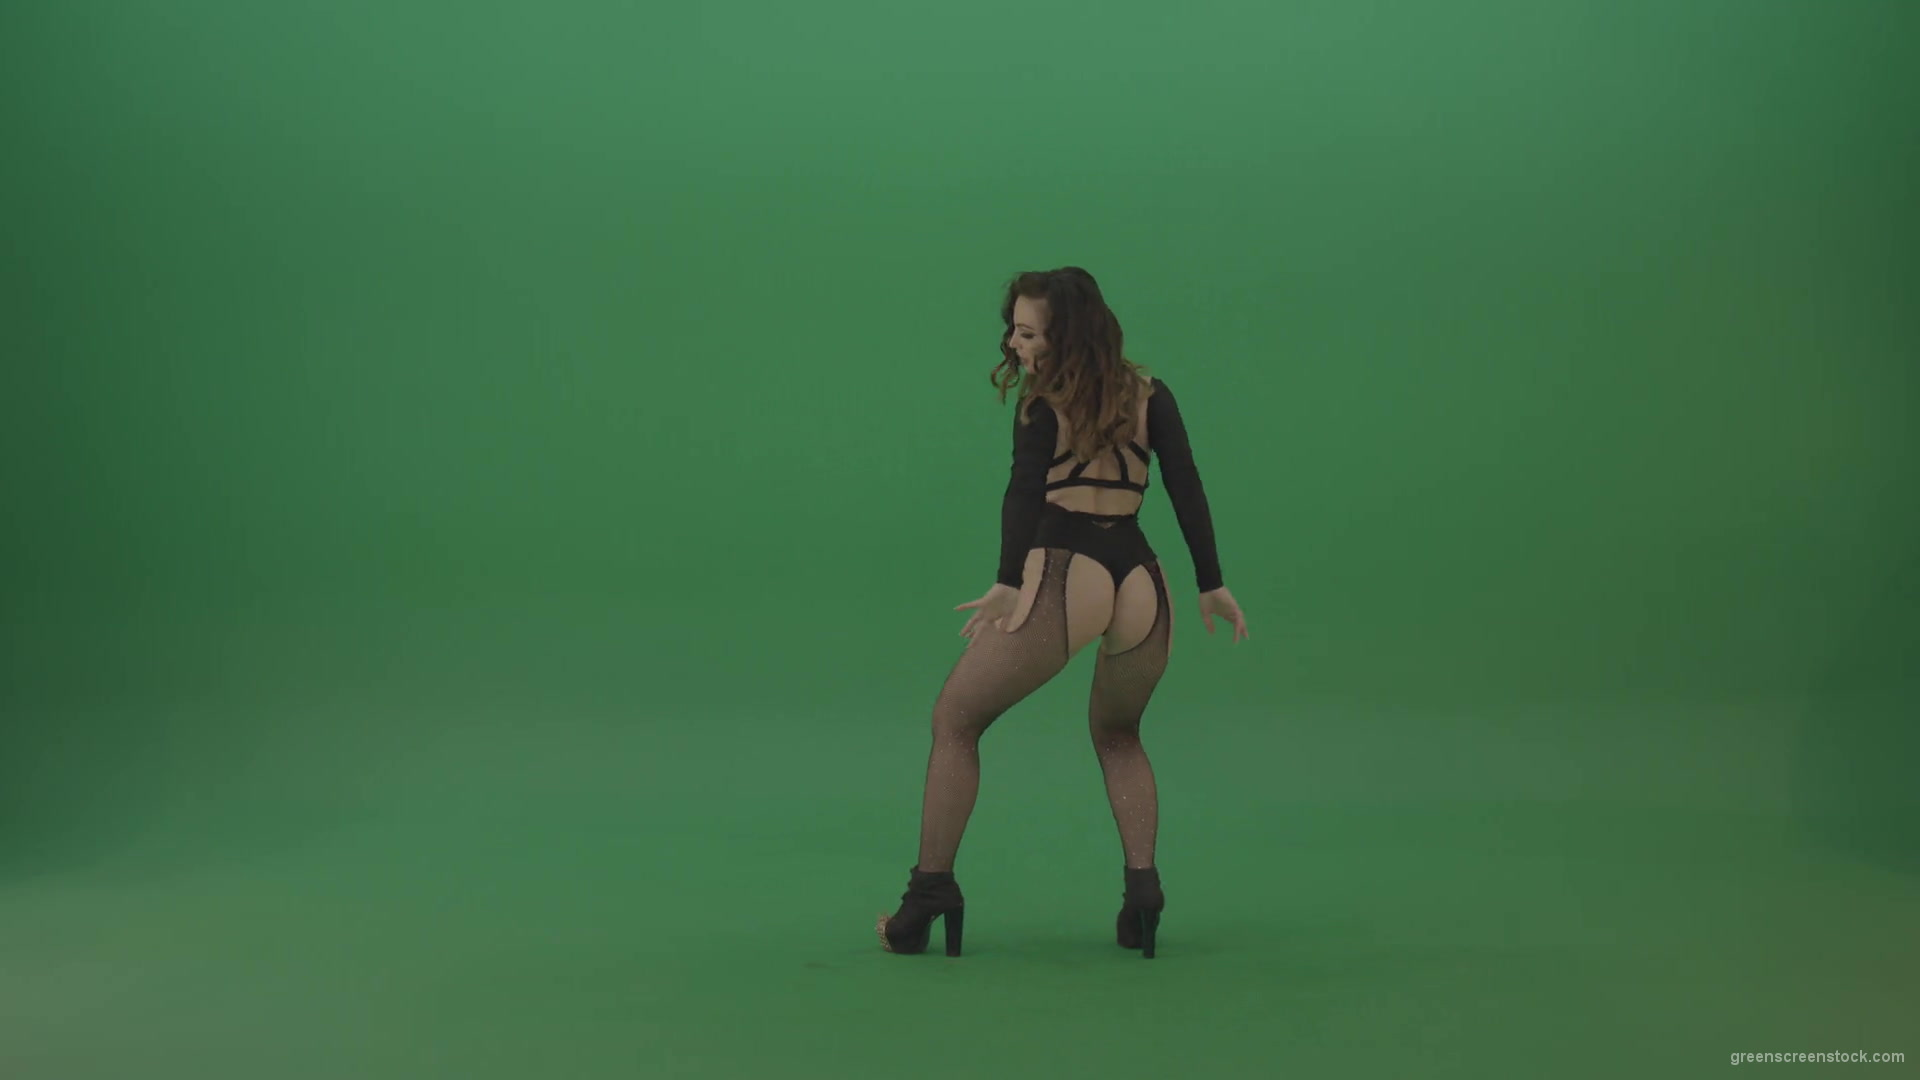 Beauty-girl-funny-shaking-the-ass-and-dancing-isolated-on-green-screen-1920_006 Green Screen Stock